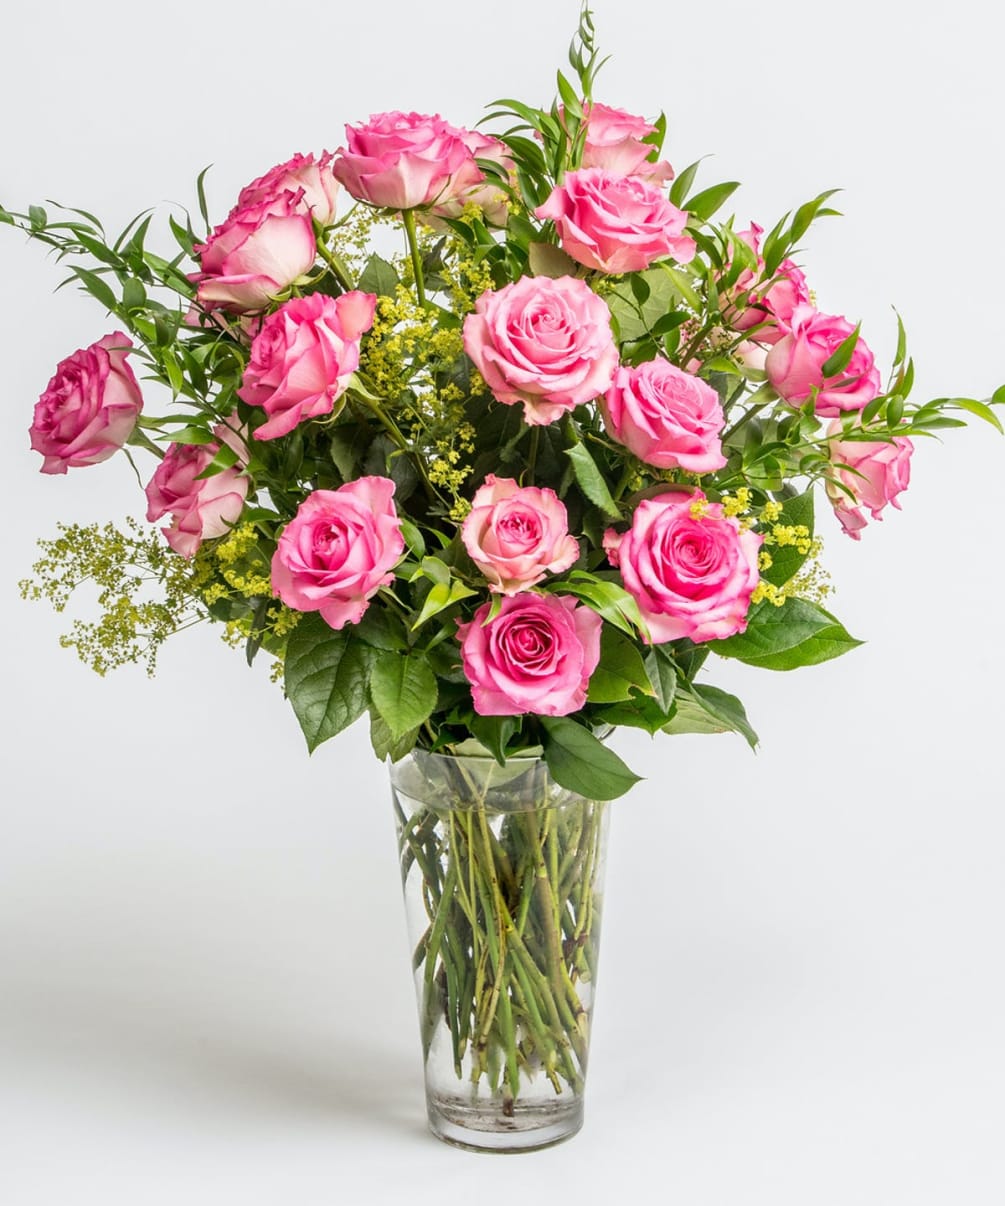 $94.99 price point for AS SHOWN is 1 Dozen roses!

NOTE - PICTURED